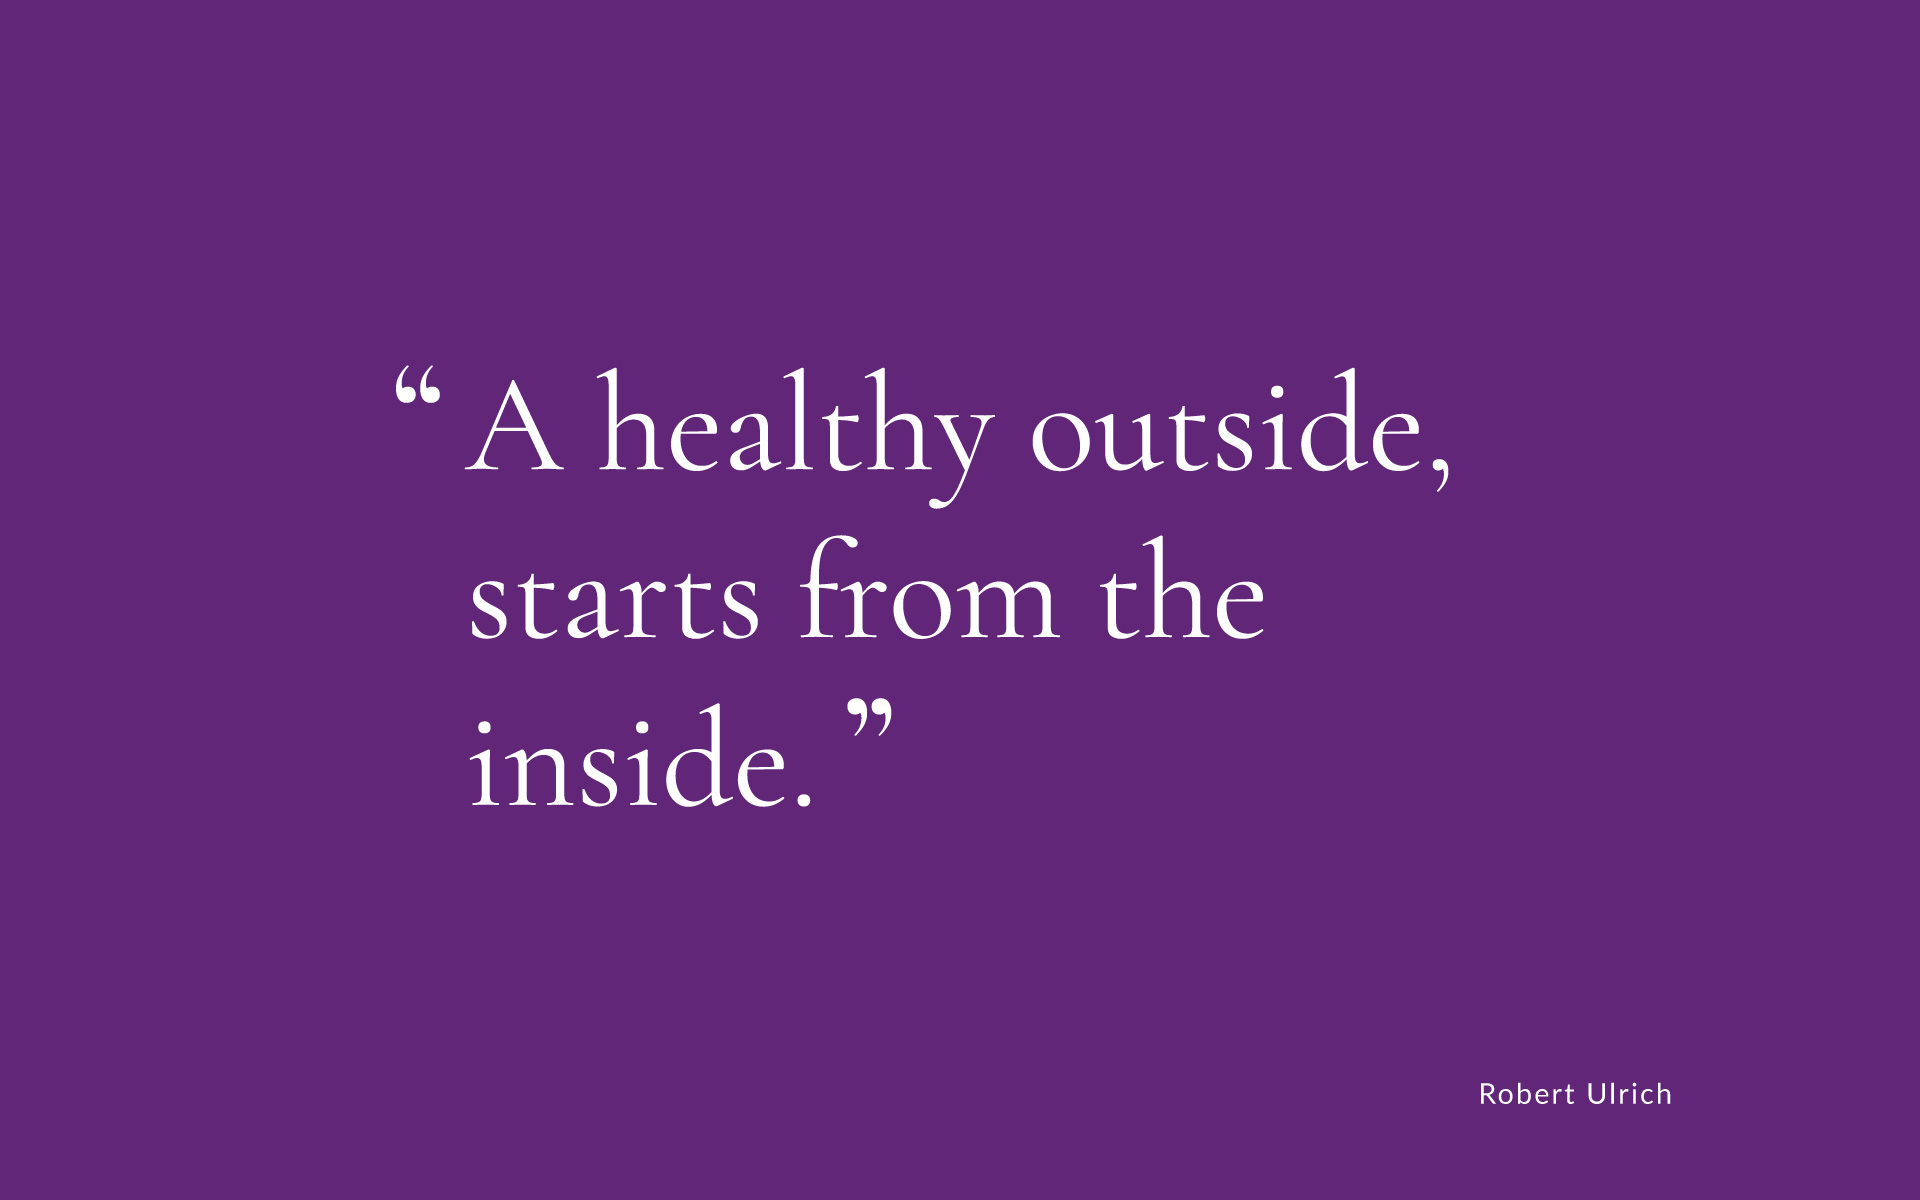 A healthy body starts from the INSIDE